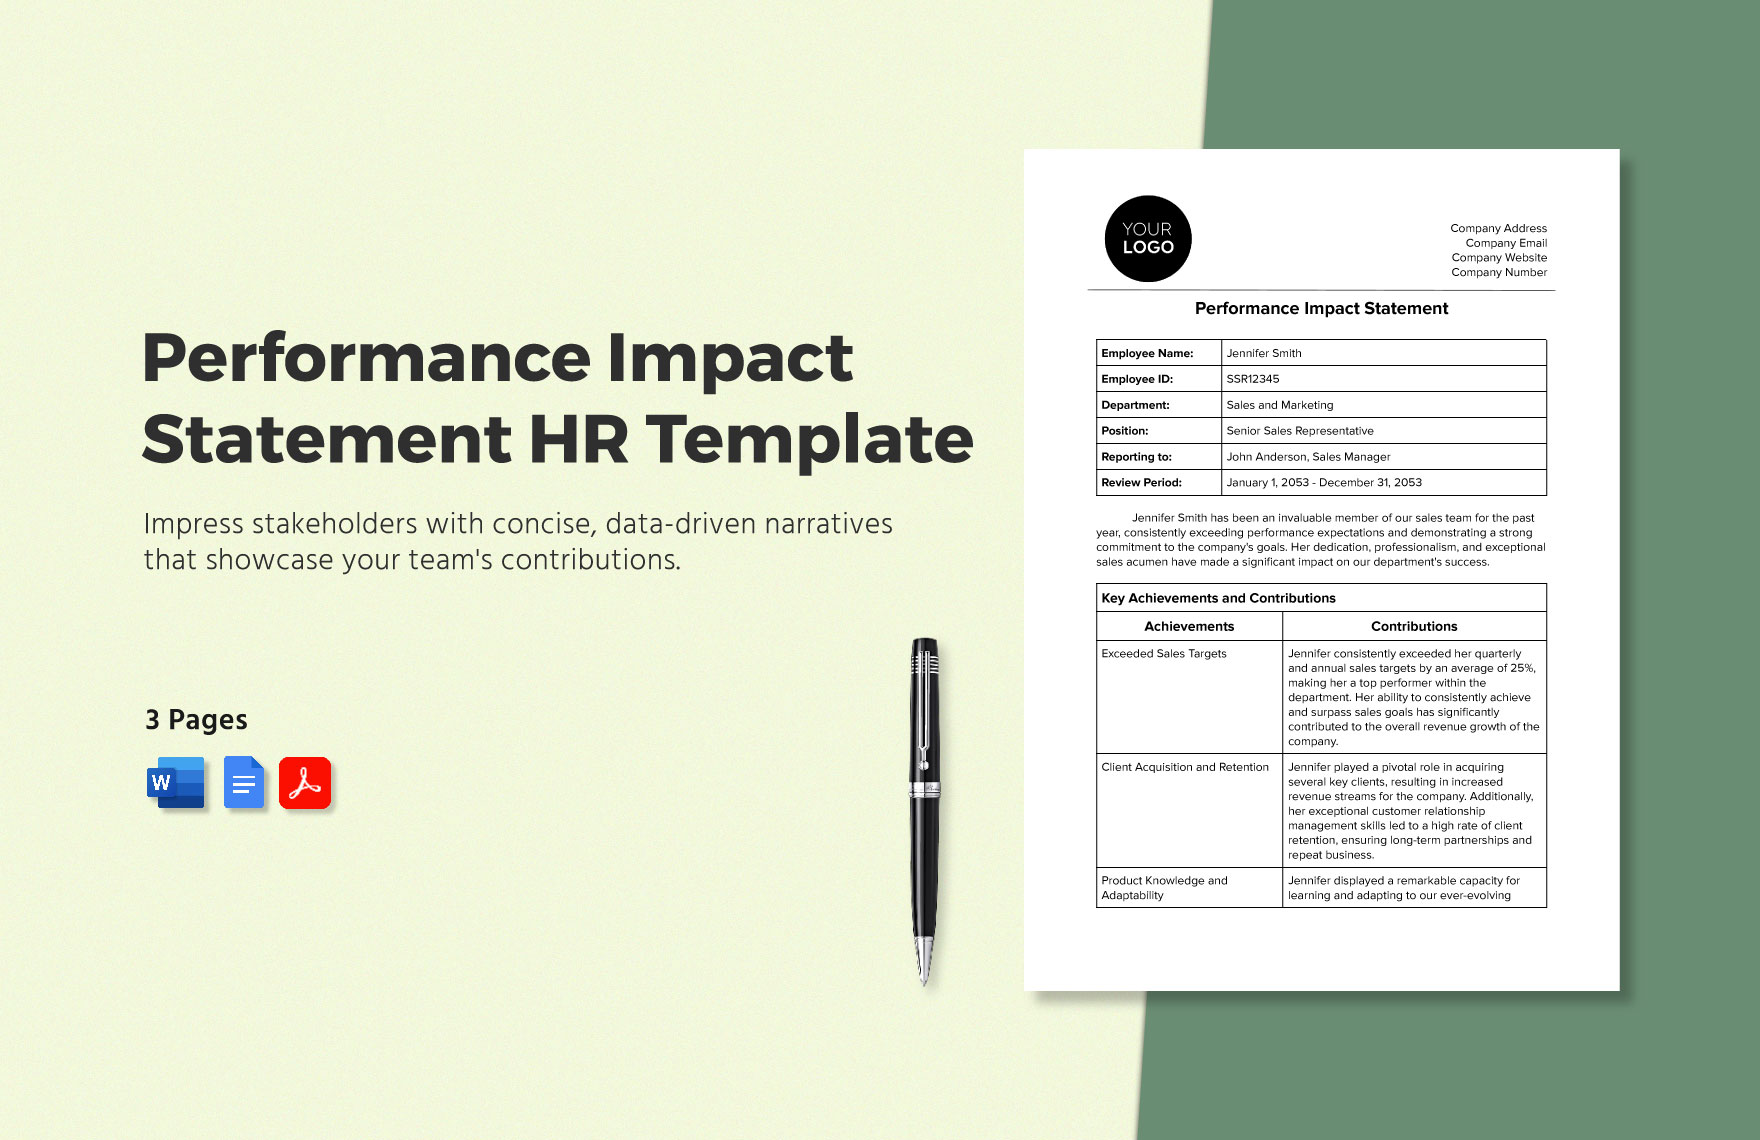 Performance Impact Statement HR Template in Word, Google Docs, PDF